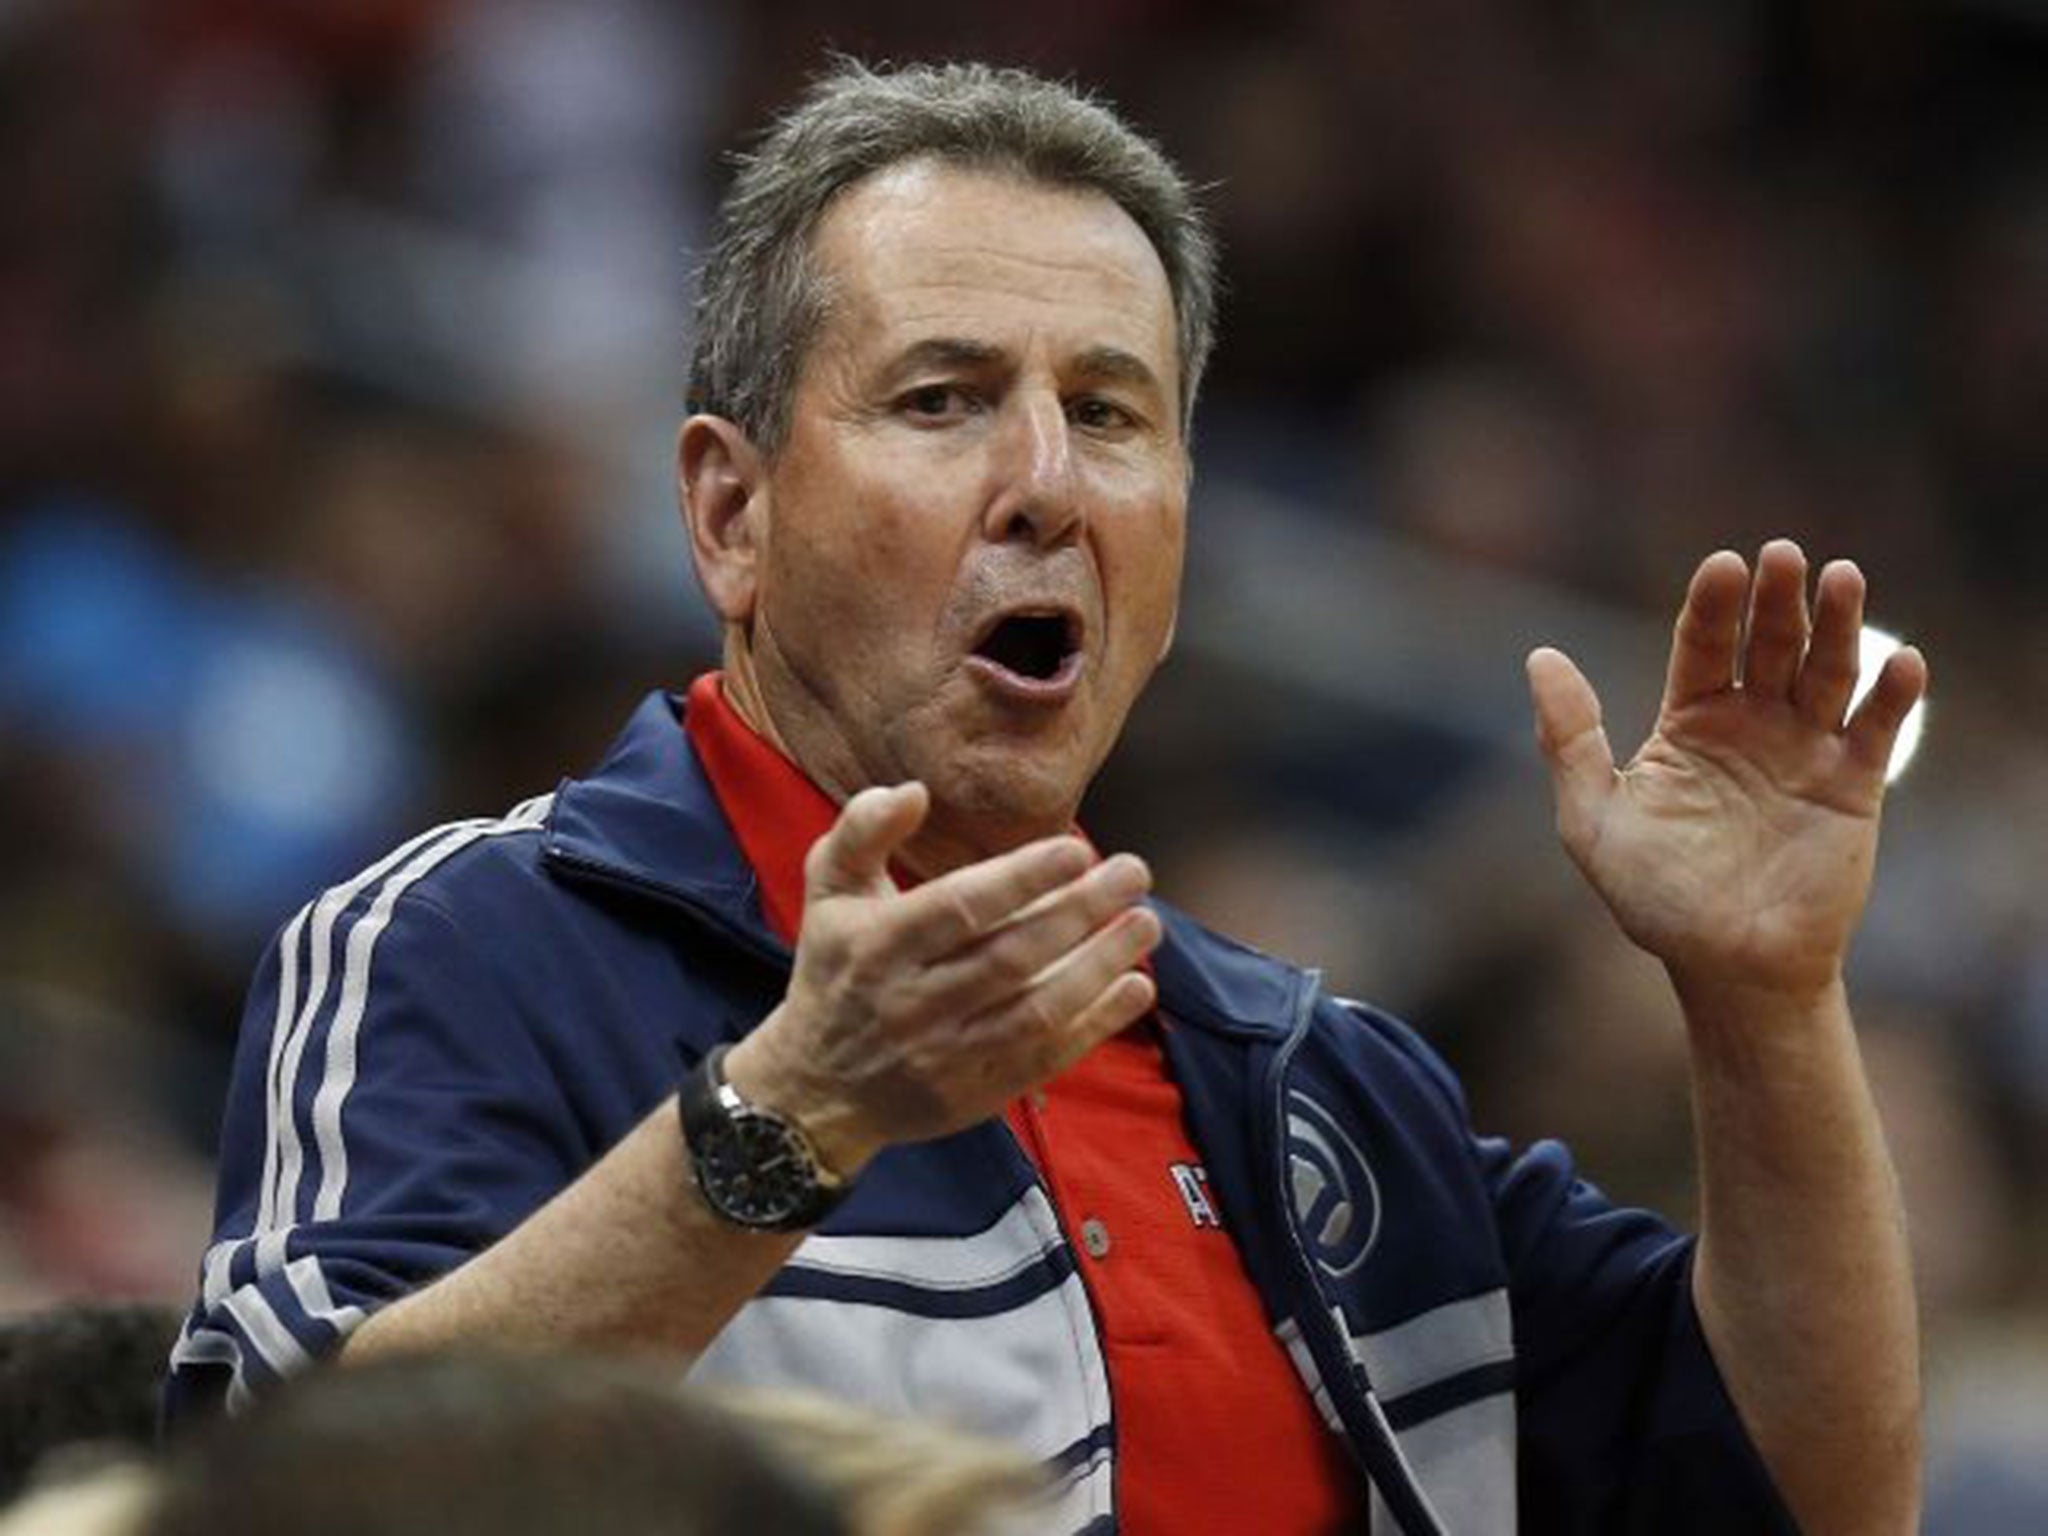 Bruce Levenson voluntarily sold his stake in the NBA's Atlanta Hawks after a racism scandal